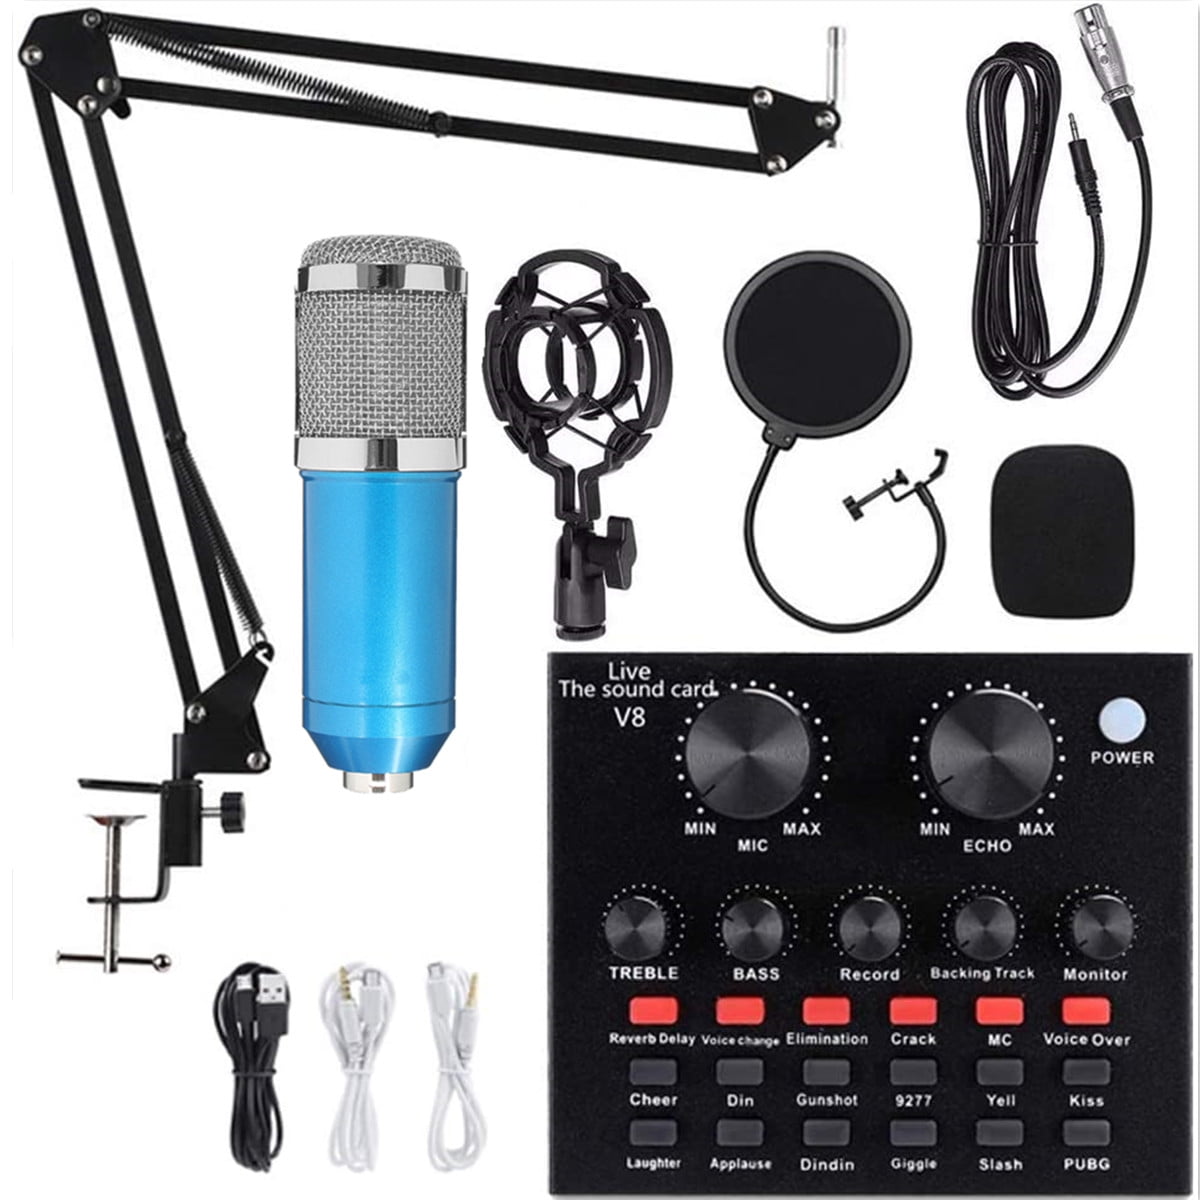 Podcast Microphone Bundle, BM800 Microphone Kit with Live Sound Card, Condenser Microphone & DJ Mixer with Adjustable Mic Suspension Scissor Arm, Shock Mount & Filter for Studio Recording & Broadcas